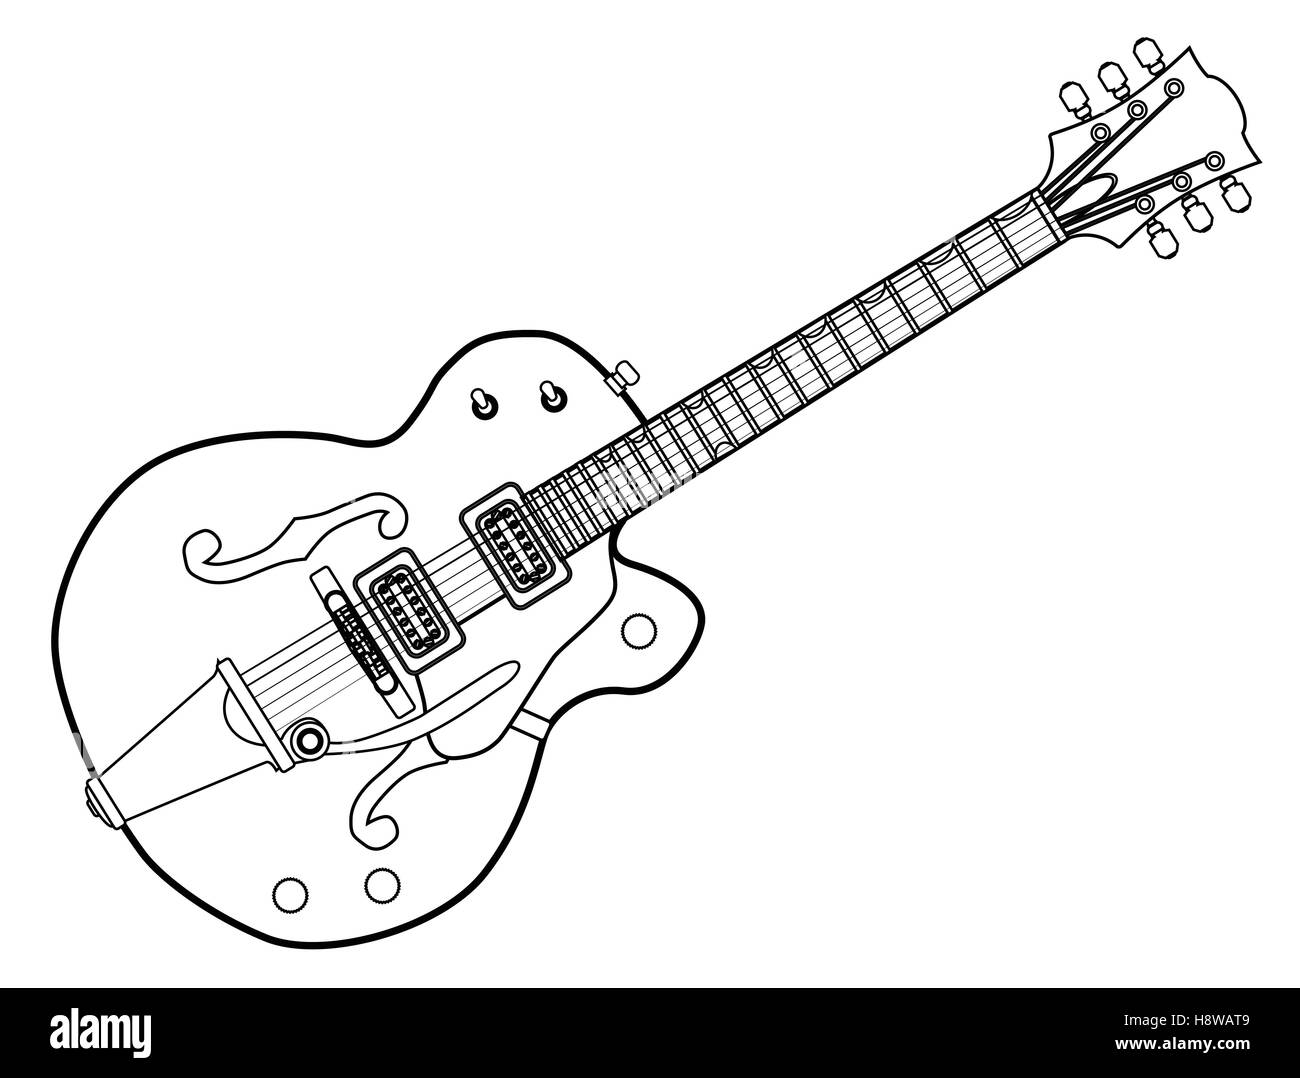 A typical country and western guitar in black and white over a white background Stock Vector